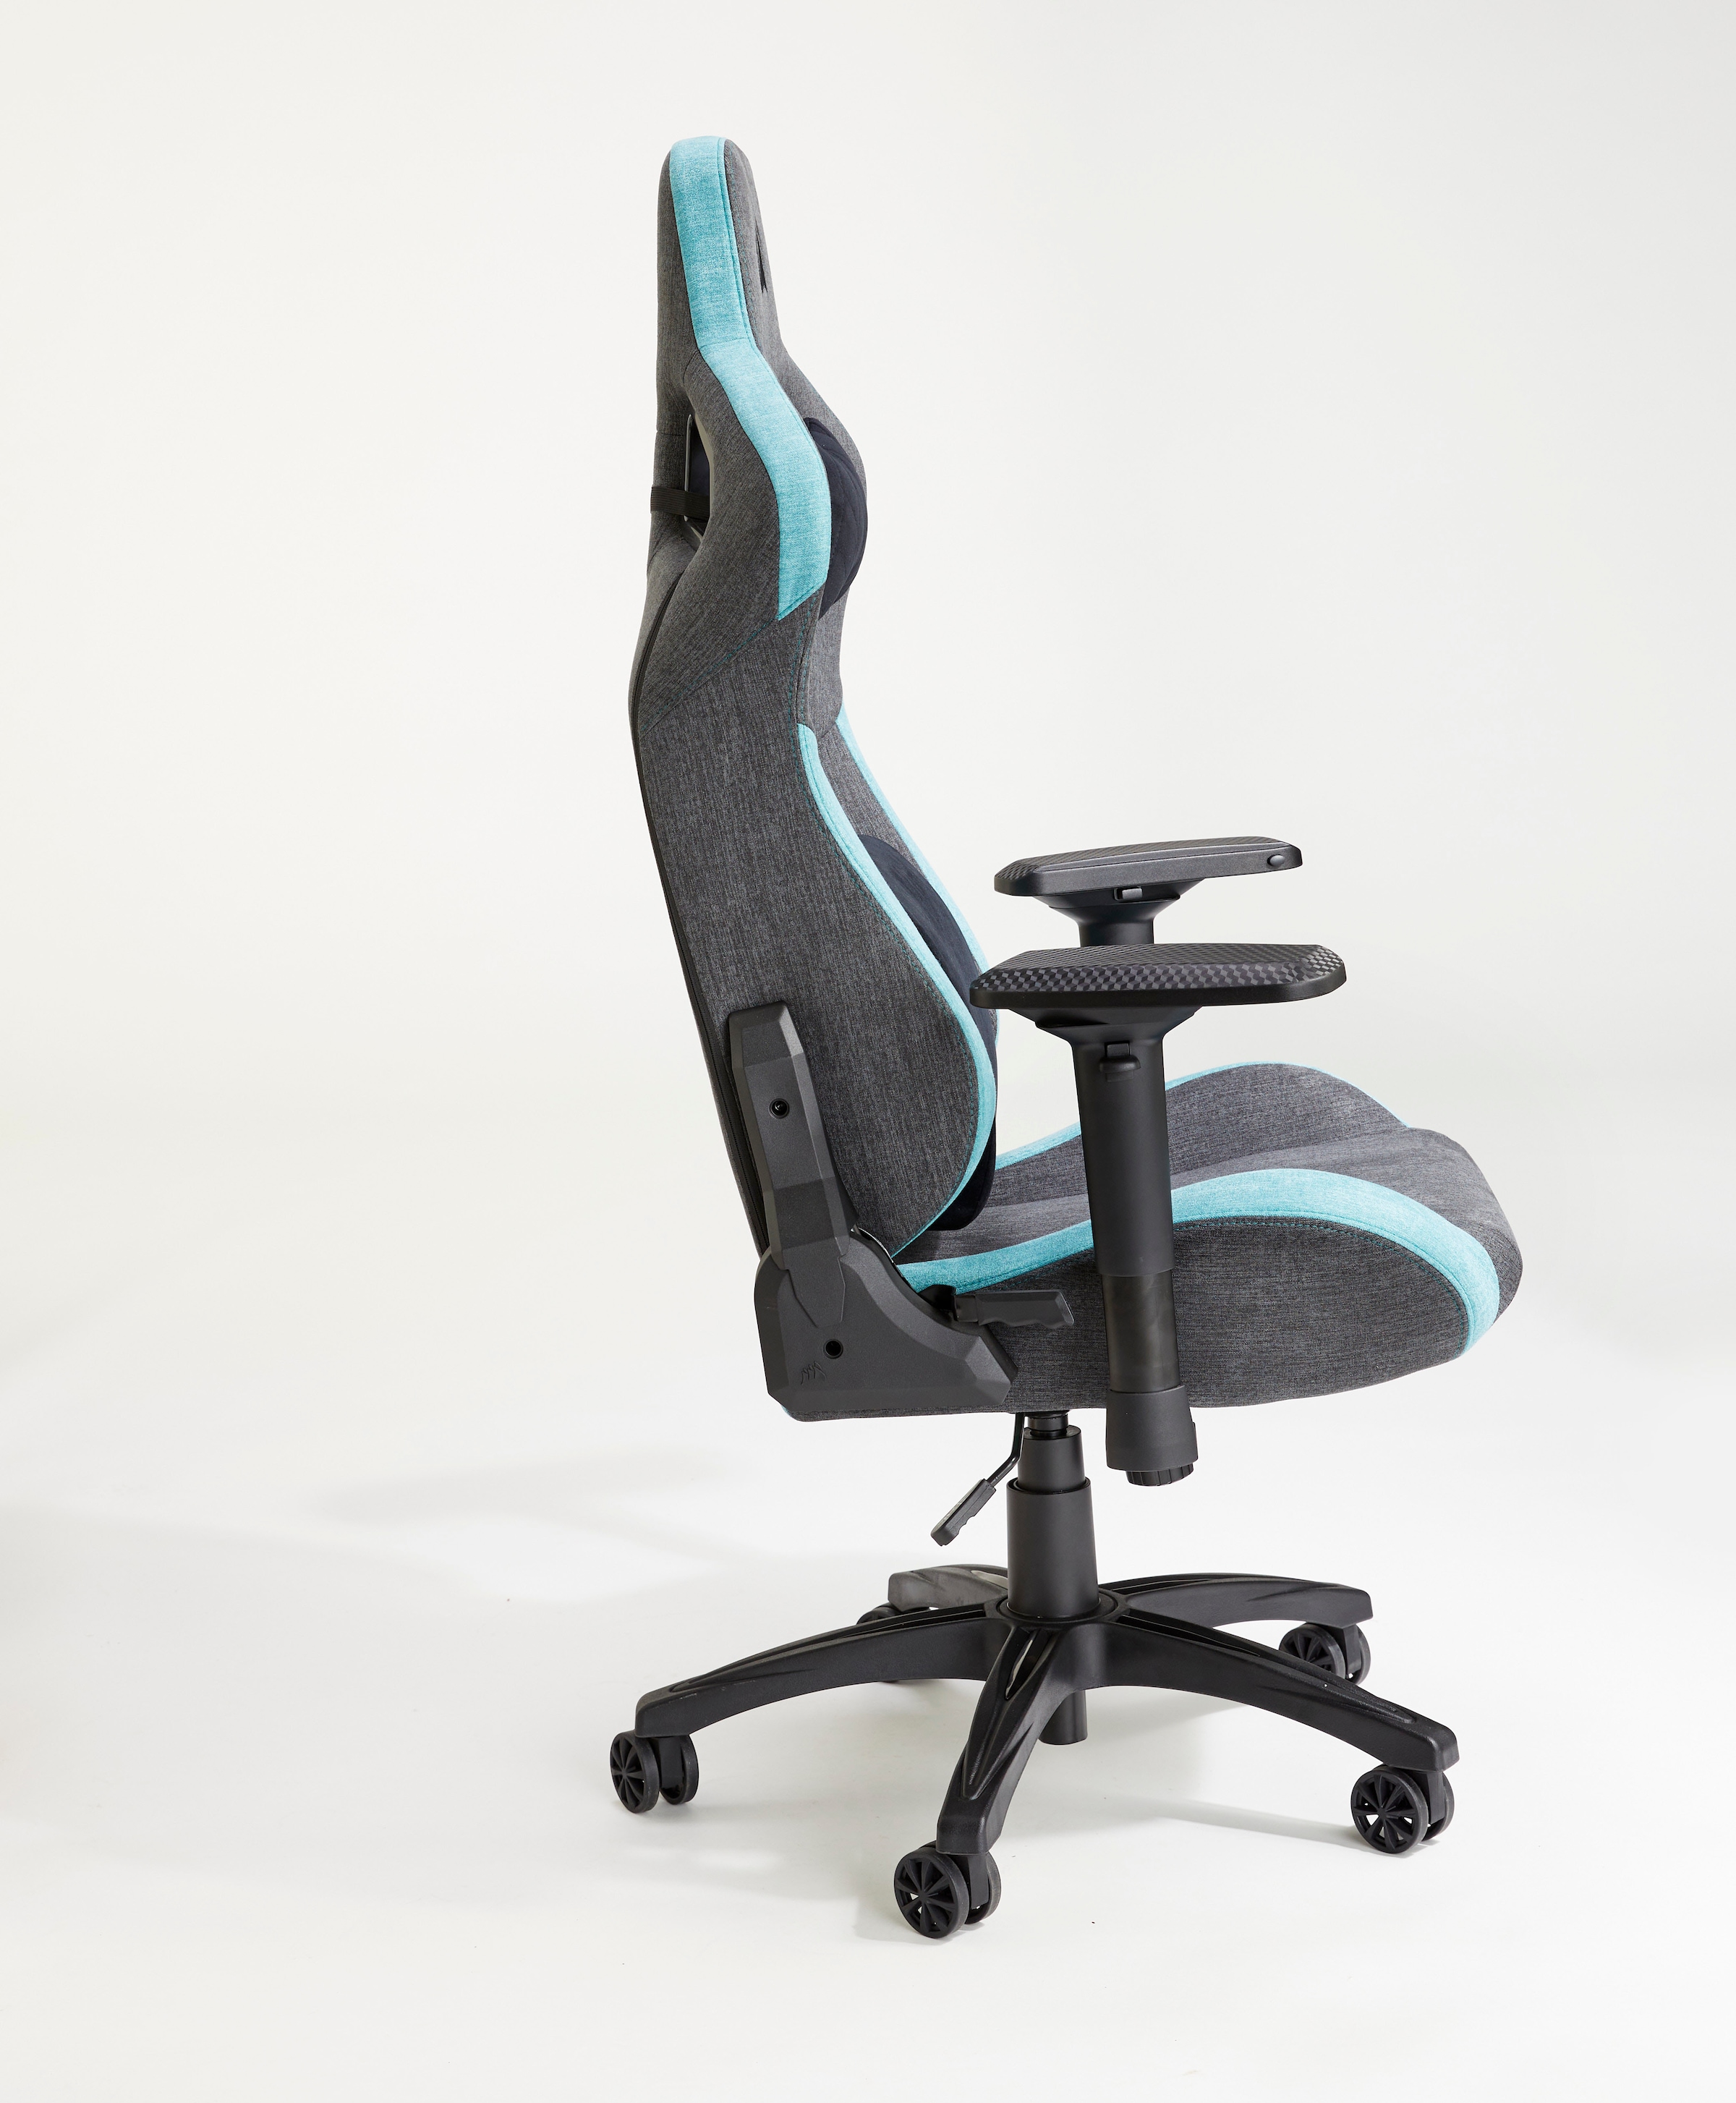 Fabric Gaming Design, Exterior bei Gaming Fabric »T3 online Corsair UNIVERSAL Chair«, Chair Racing-Inspired Rush Soft